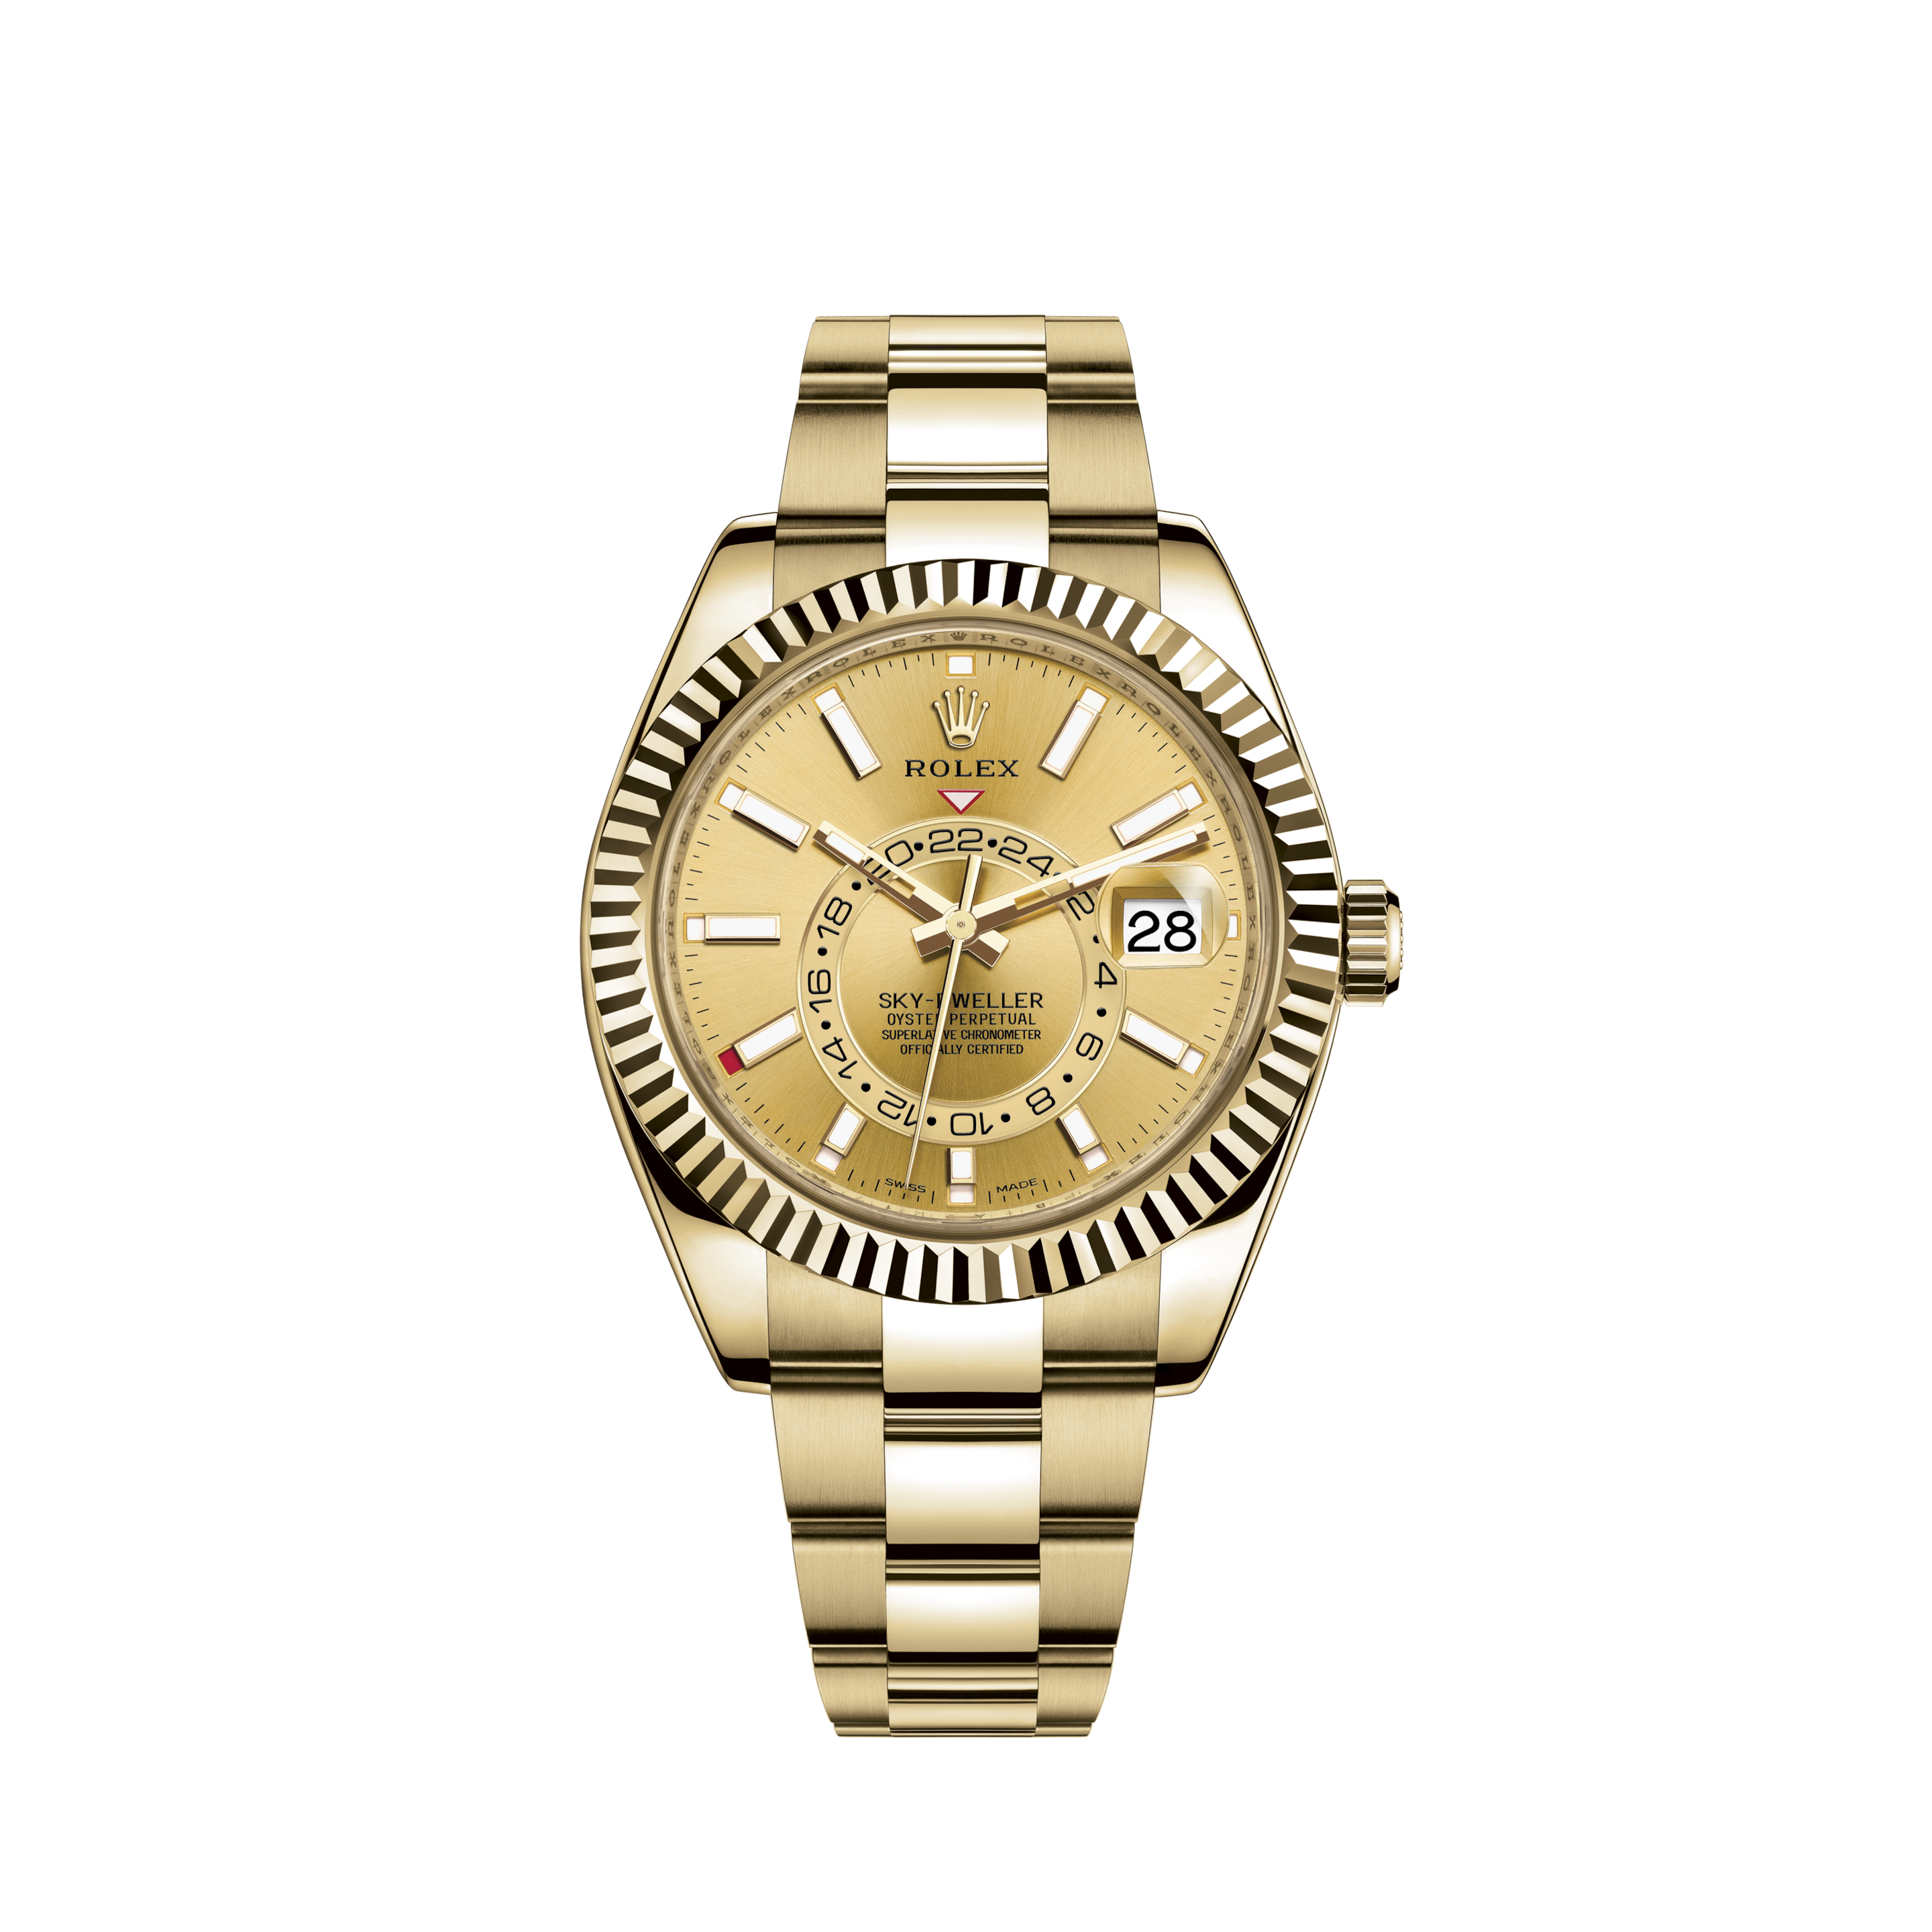 Rolex Datejust Oyster Perpetual 18K Gold Diamond Automatic